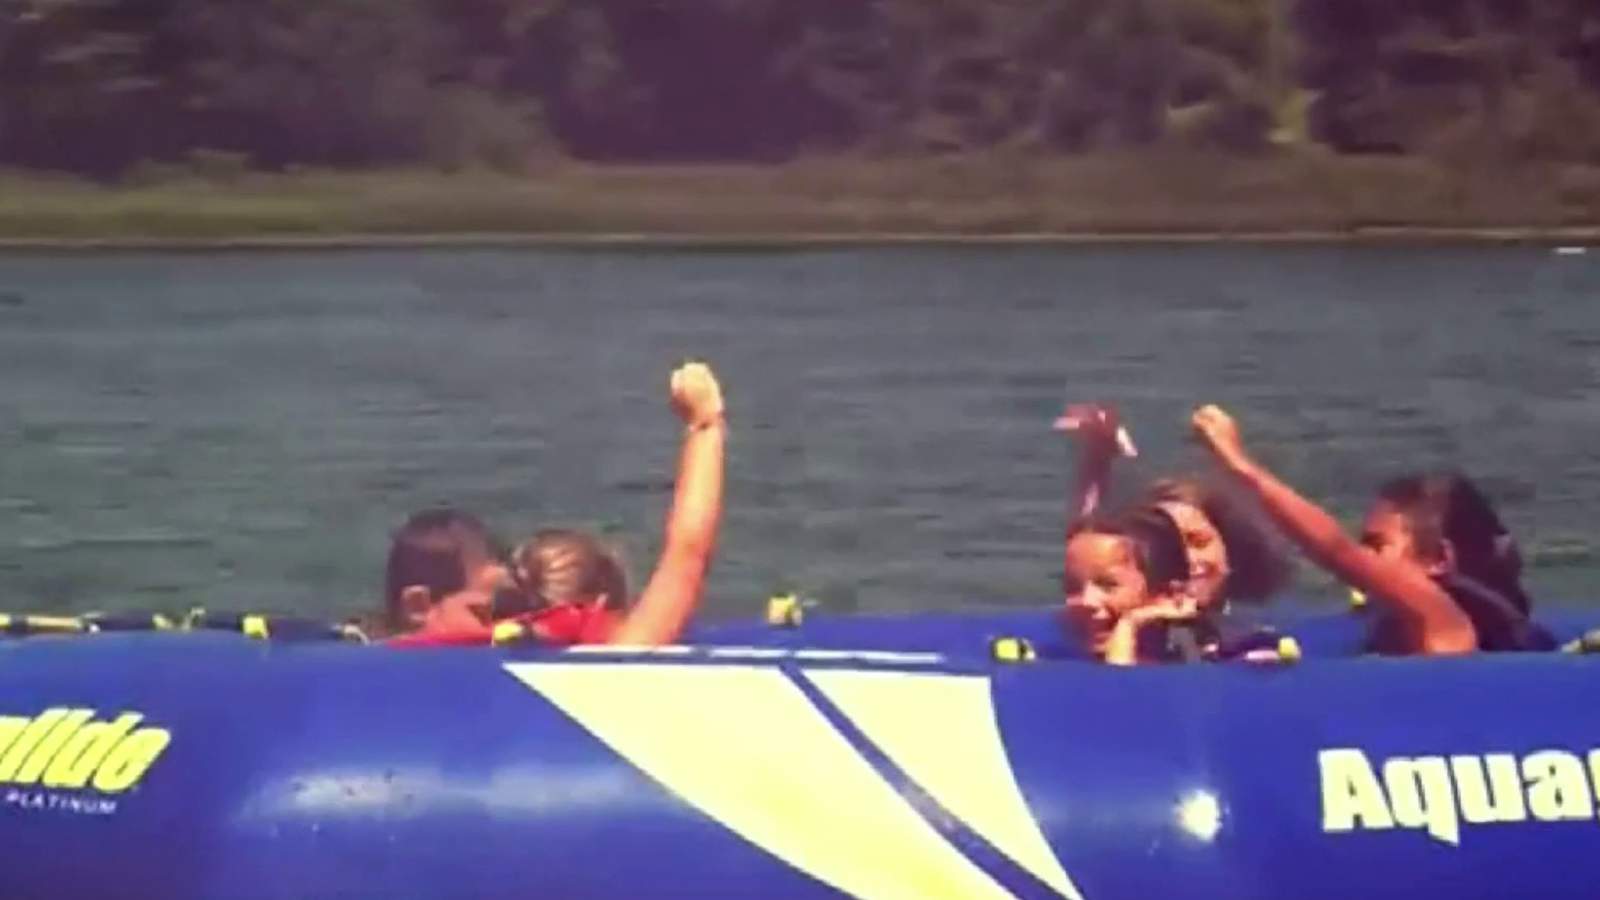 Summer camps in Michigan following strict distancing guidelines